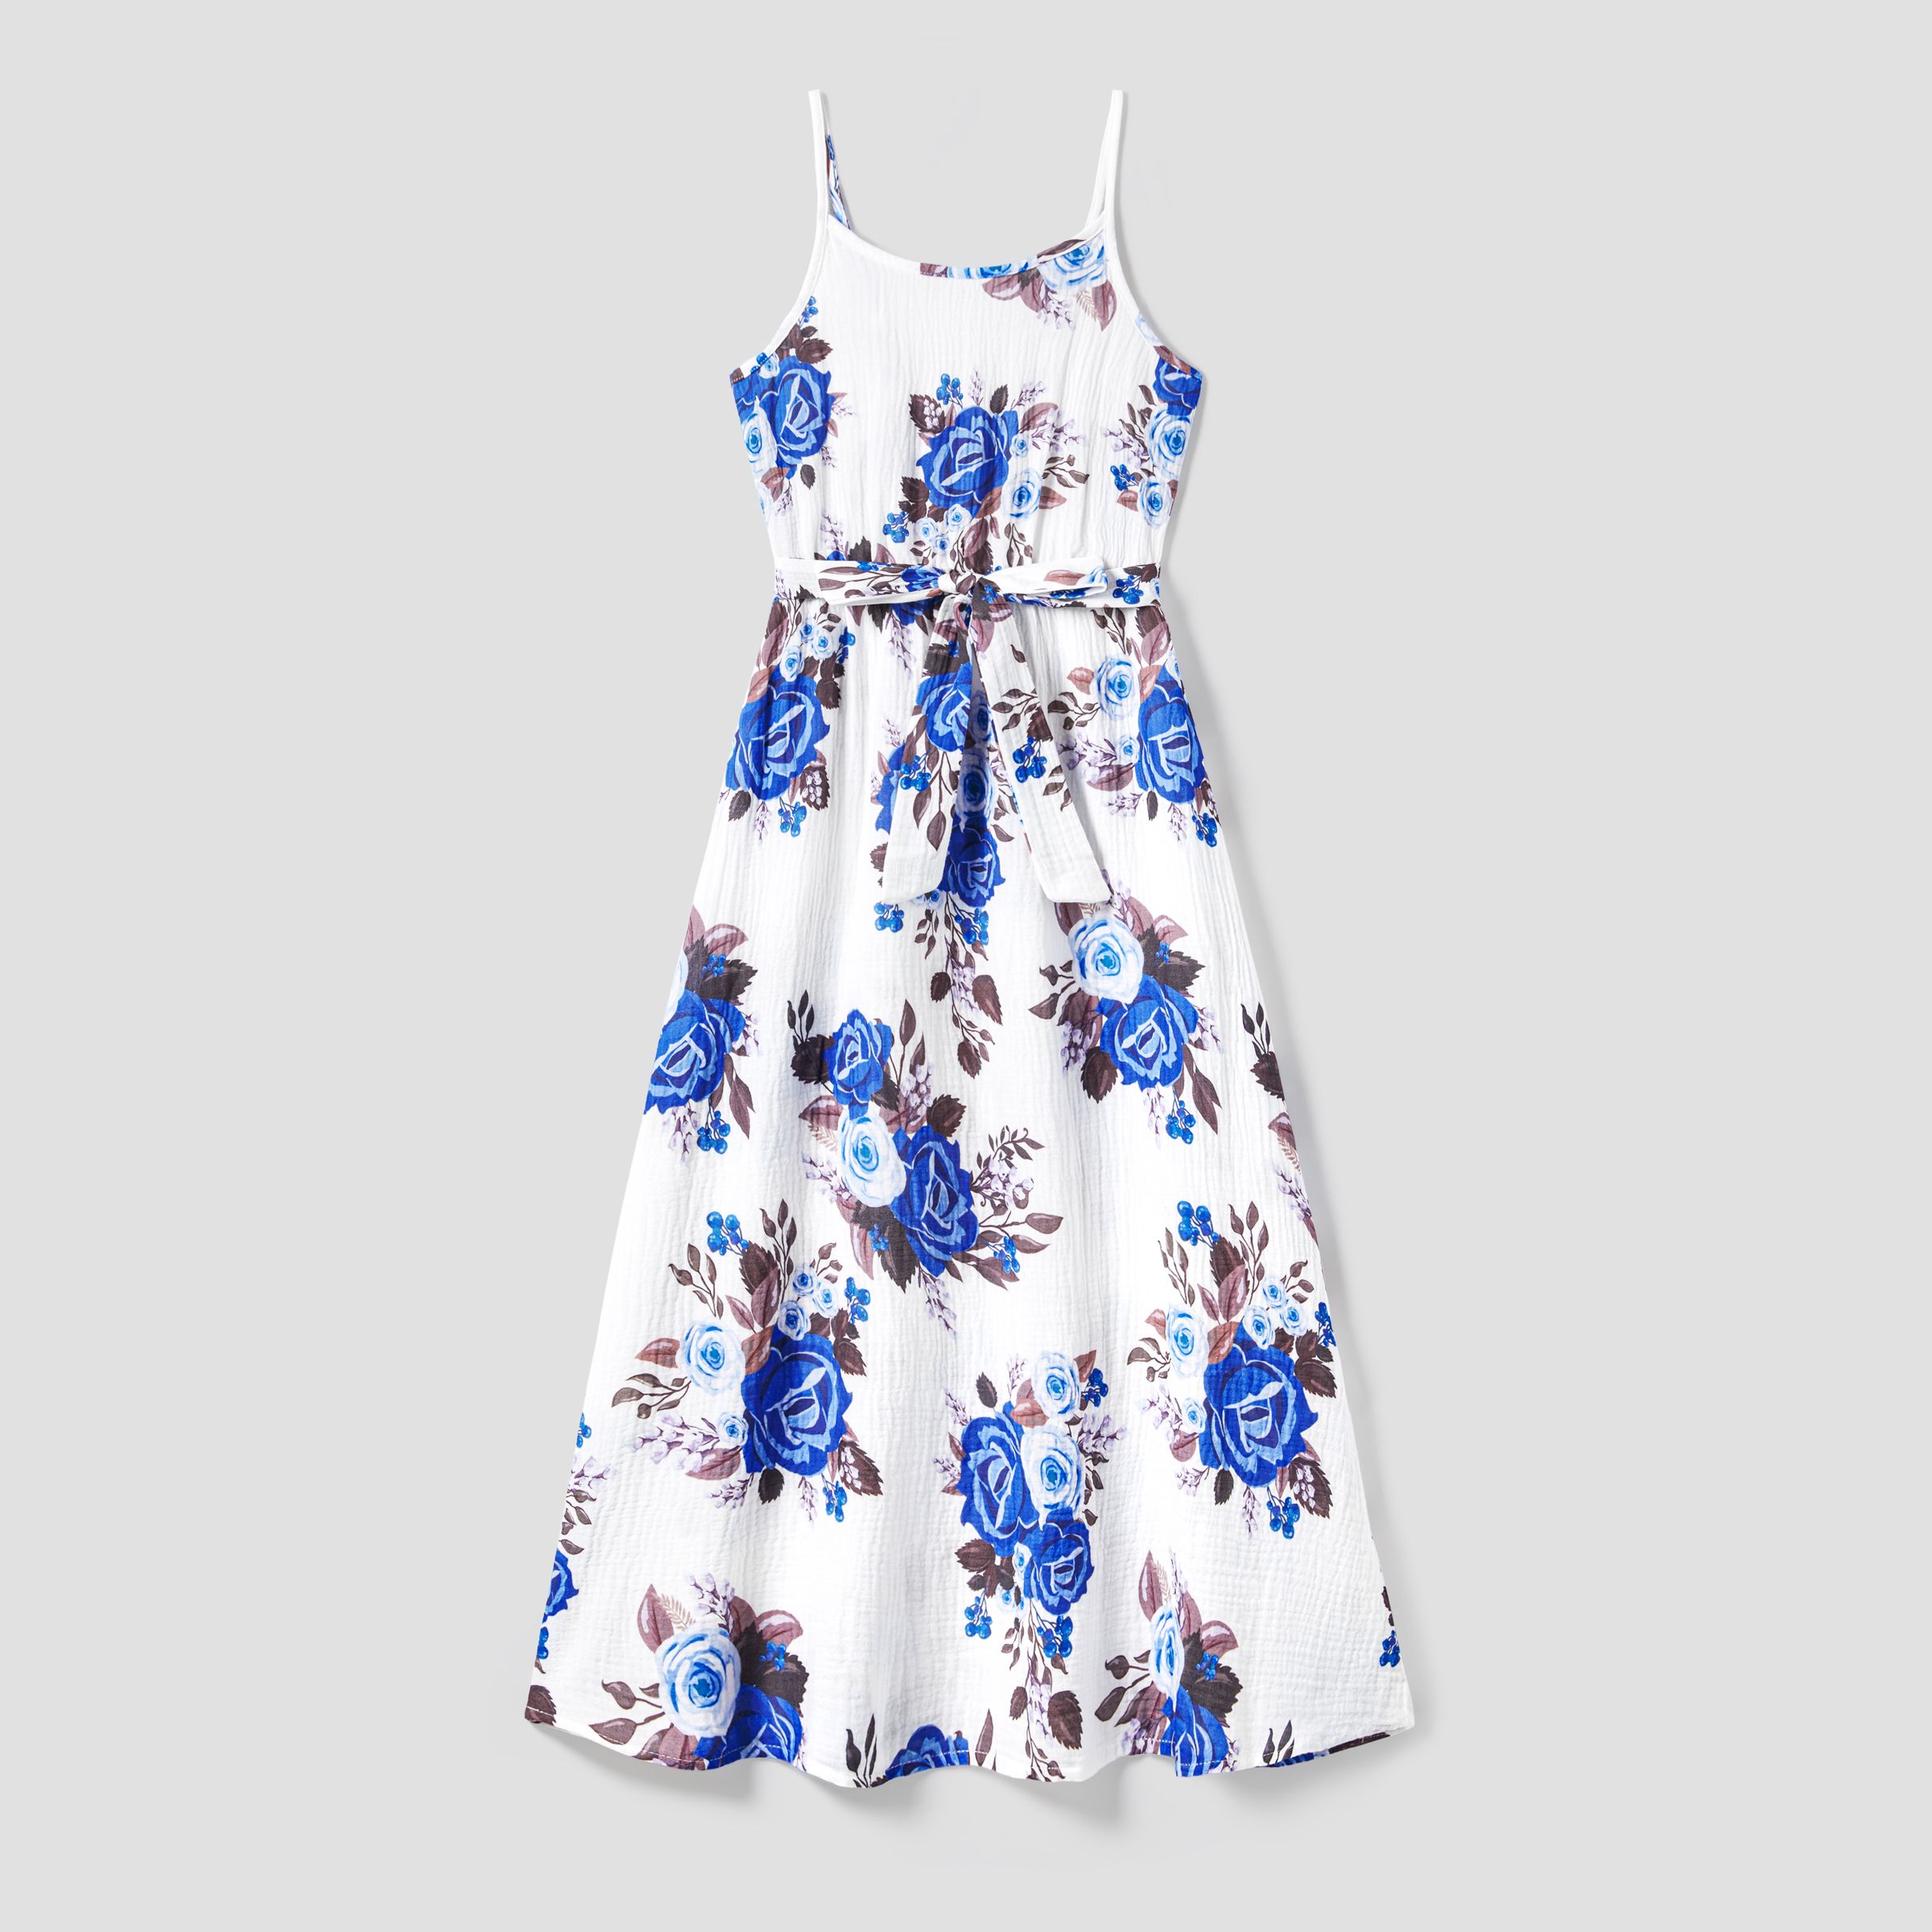 Family Matching Solid Color Shirt And Floral Cotton Strap Dress Sets